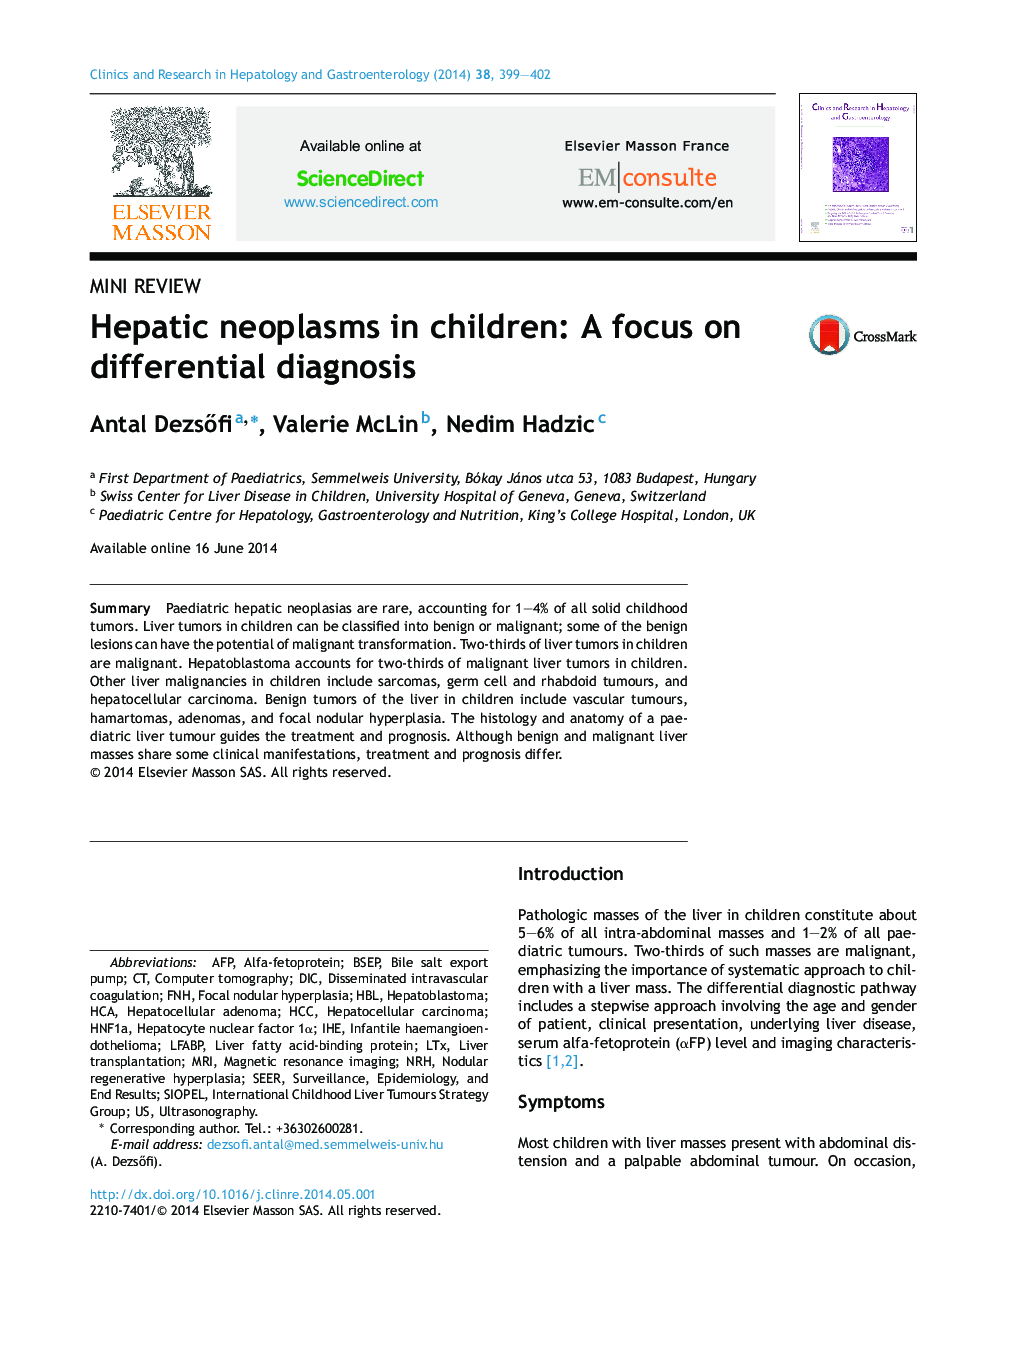 Hepatic neoplasms in children: A focus on differential diagnosis